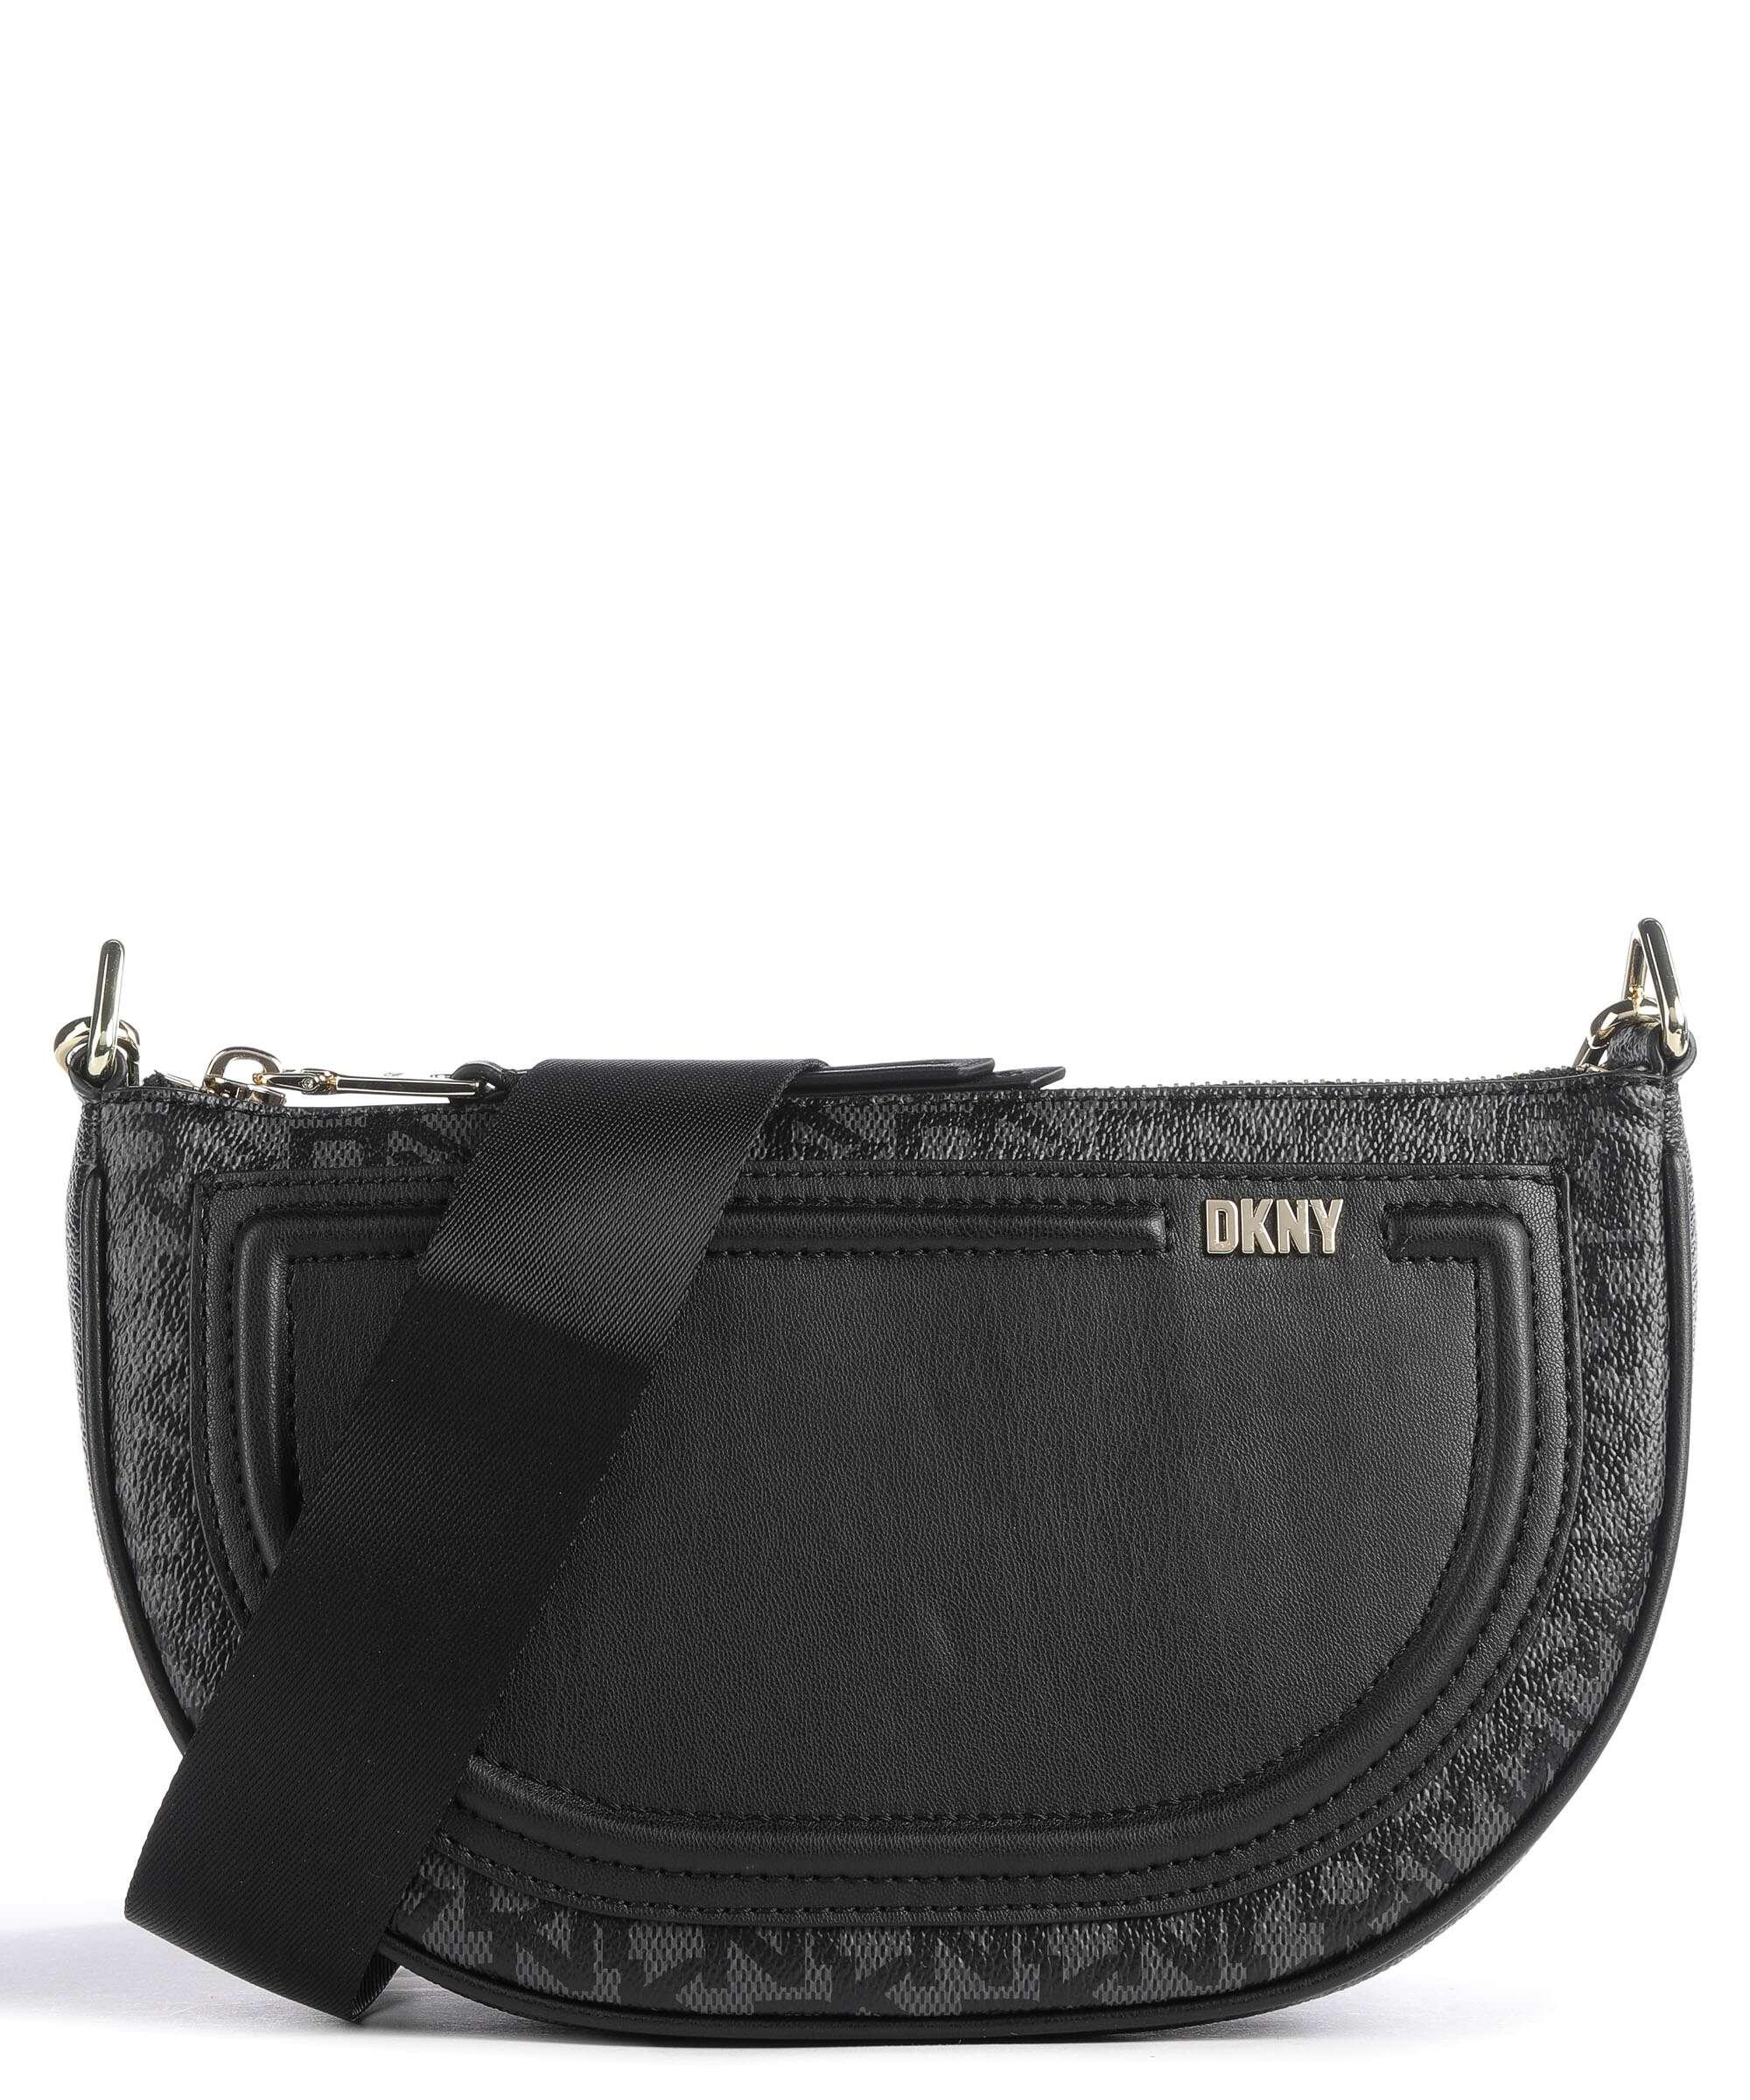 DKNY Bags  Handbags outlet  Girls  1800 products on sale  FASHIOLAcouk